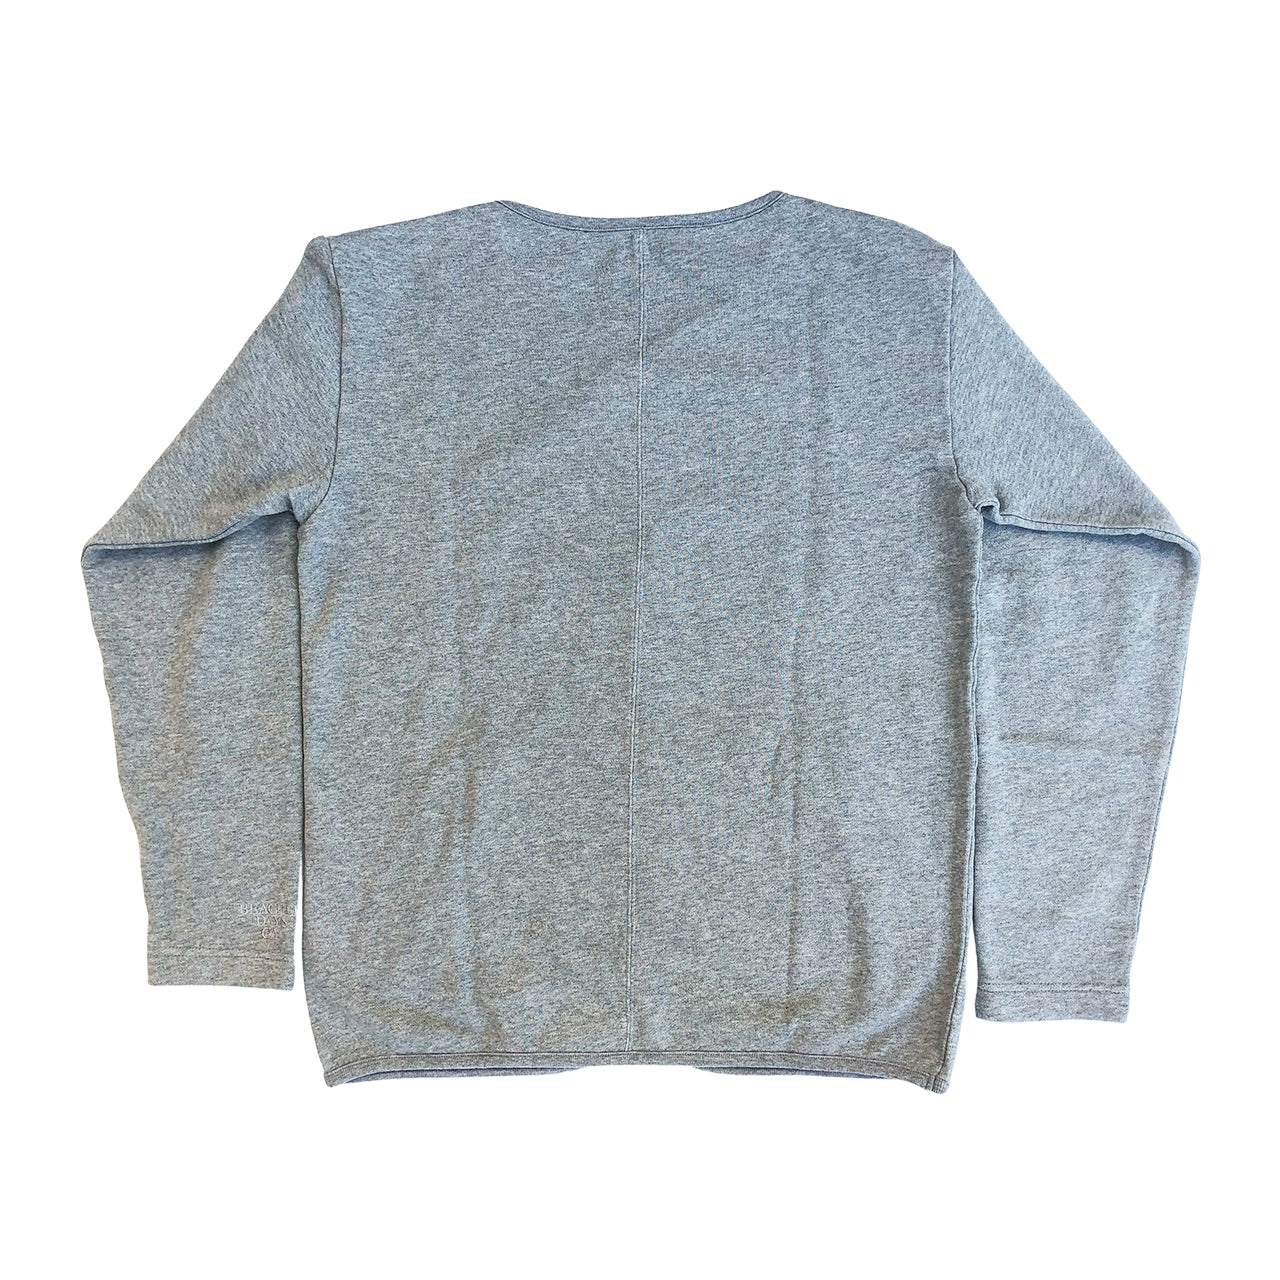 BD sweat cardigan directly managed store only 